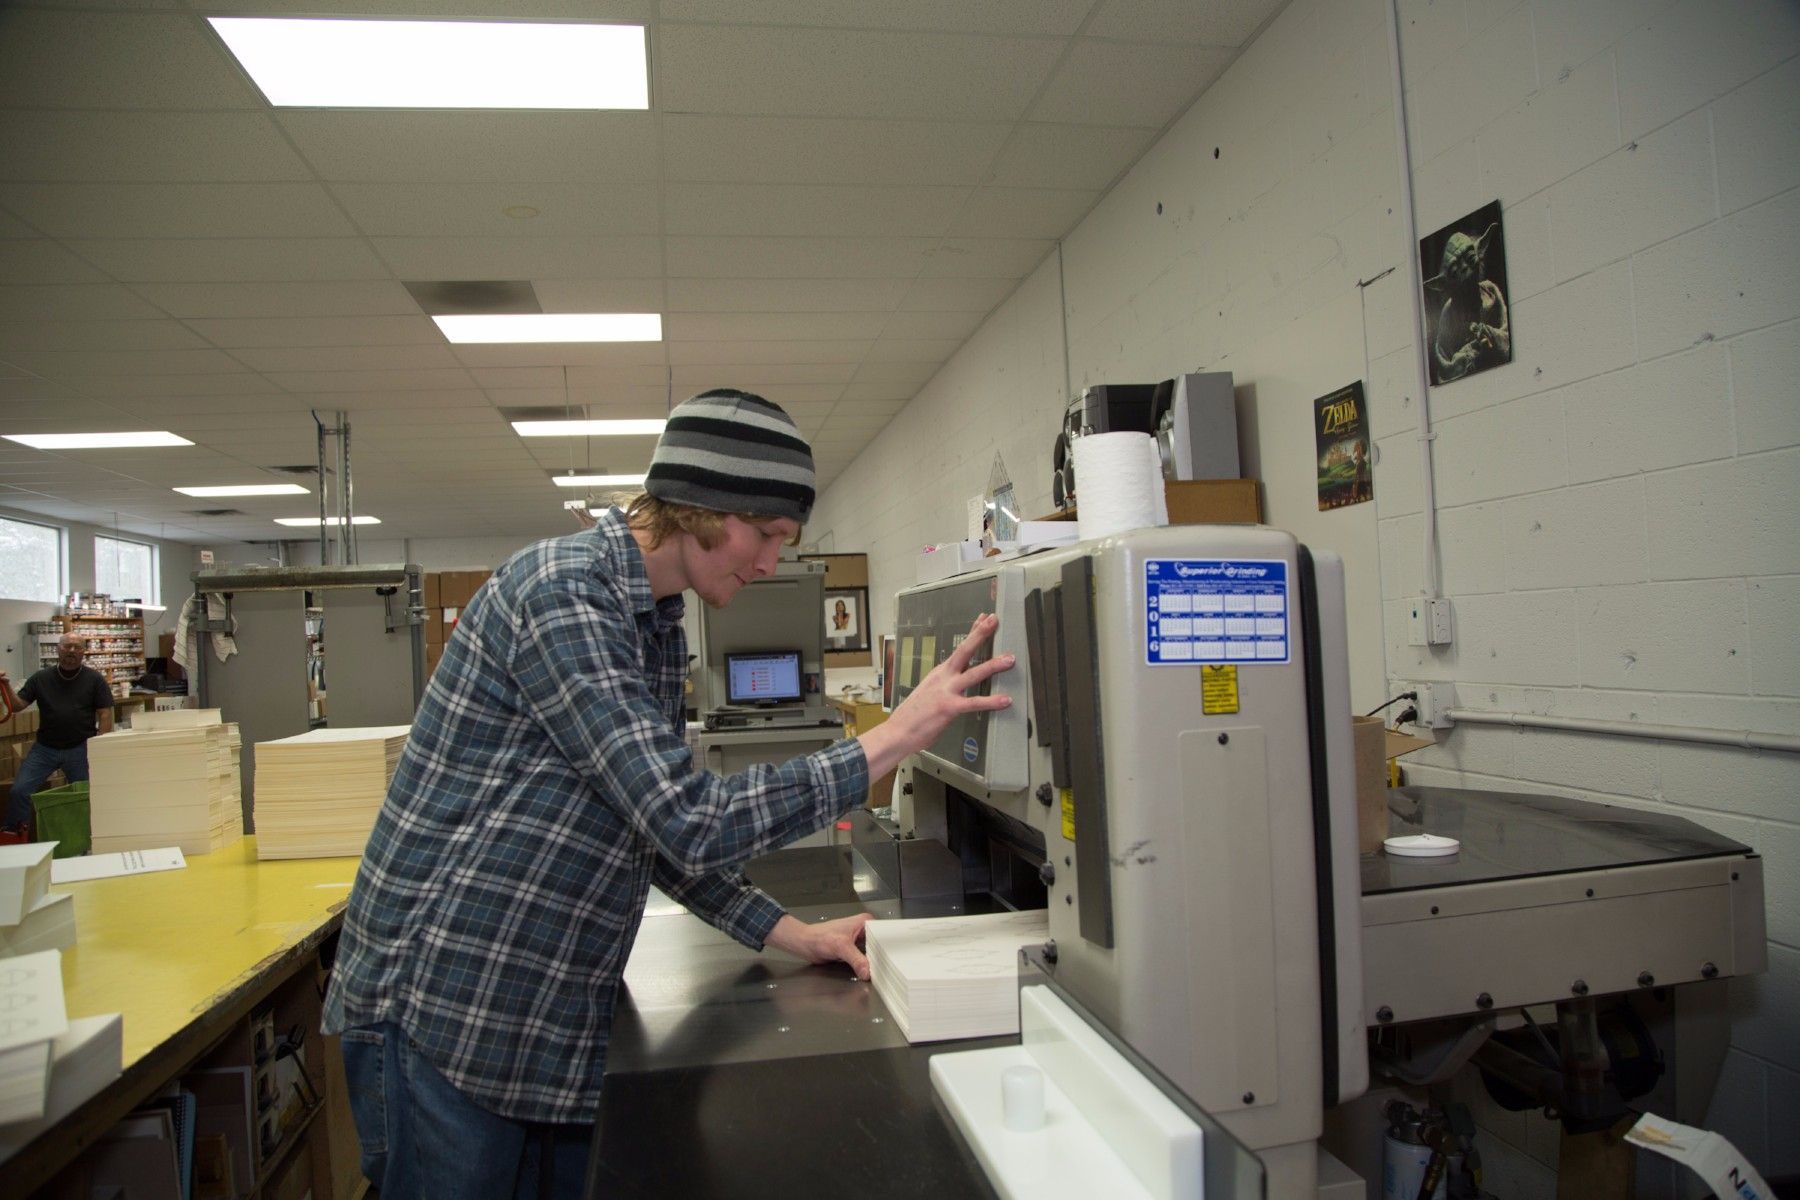 print shop worker applying finishing touches in salt lake city